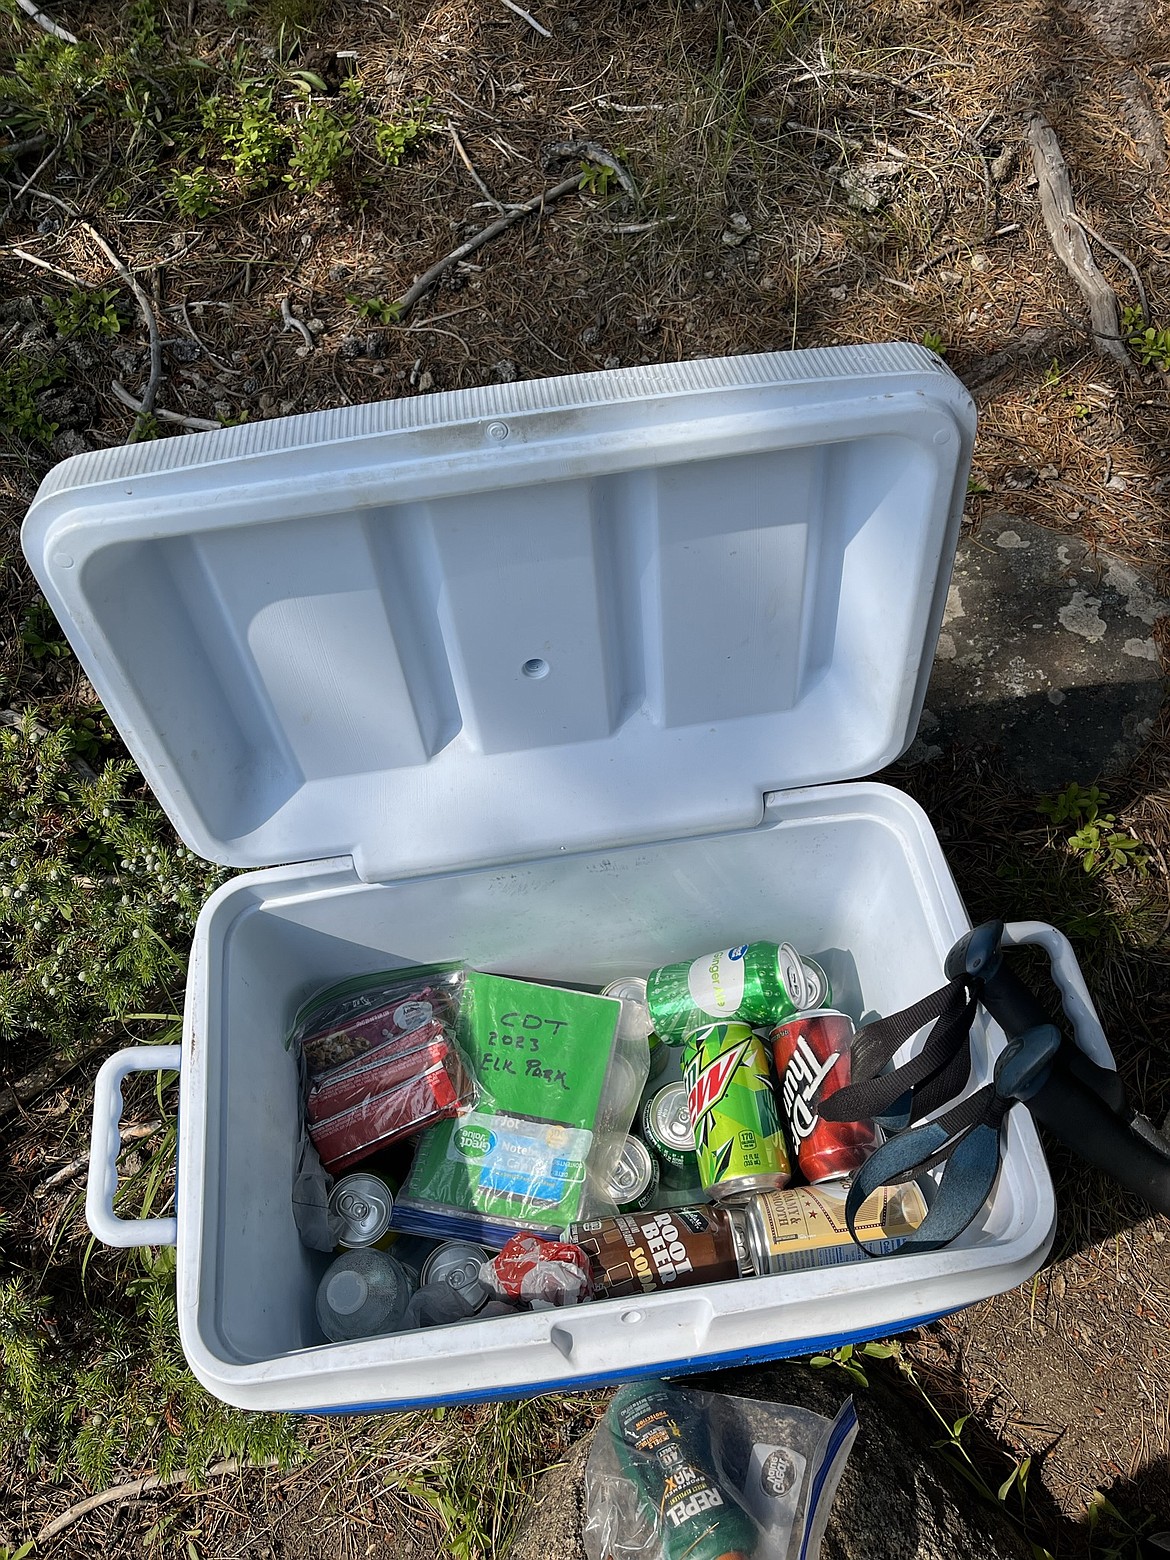 "Trail magic" is what thru hikers call acts of generosity, like supplying free food and drinks. (photo provided)